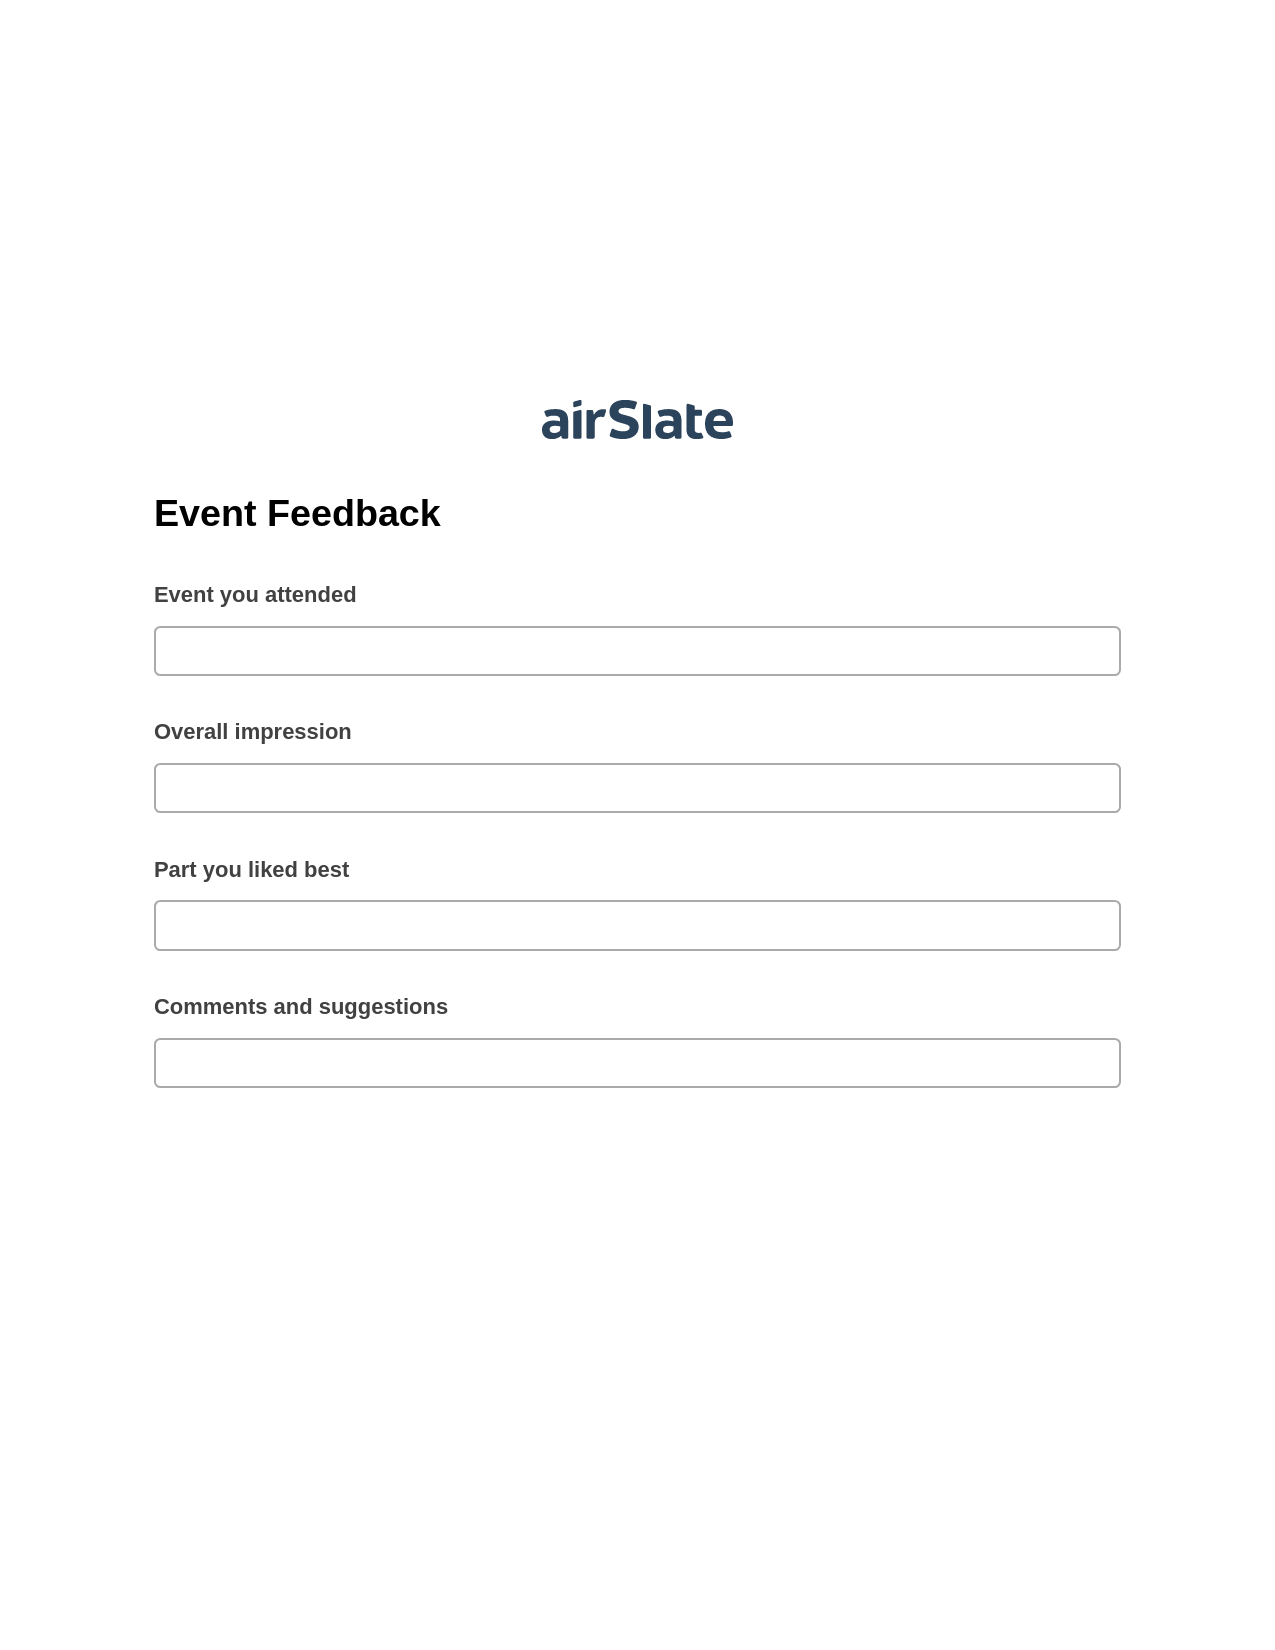 Event Feedback Pre-fill Slate from MS Dynamics 365 Records Bot, Open as Role Bot, Google Drive Bot